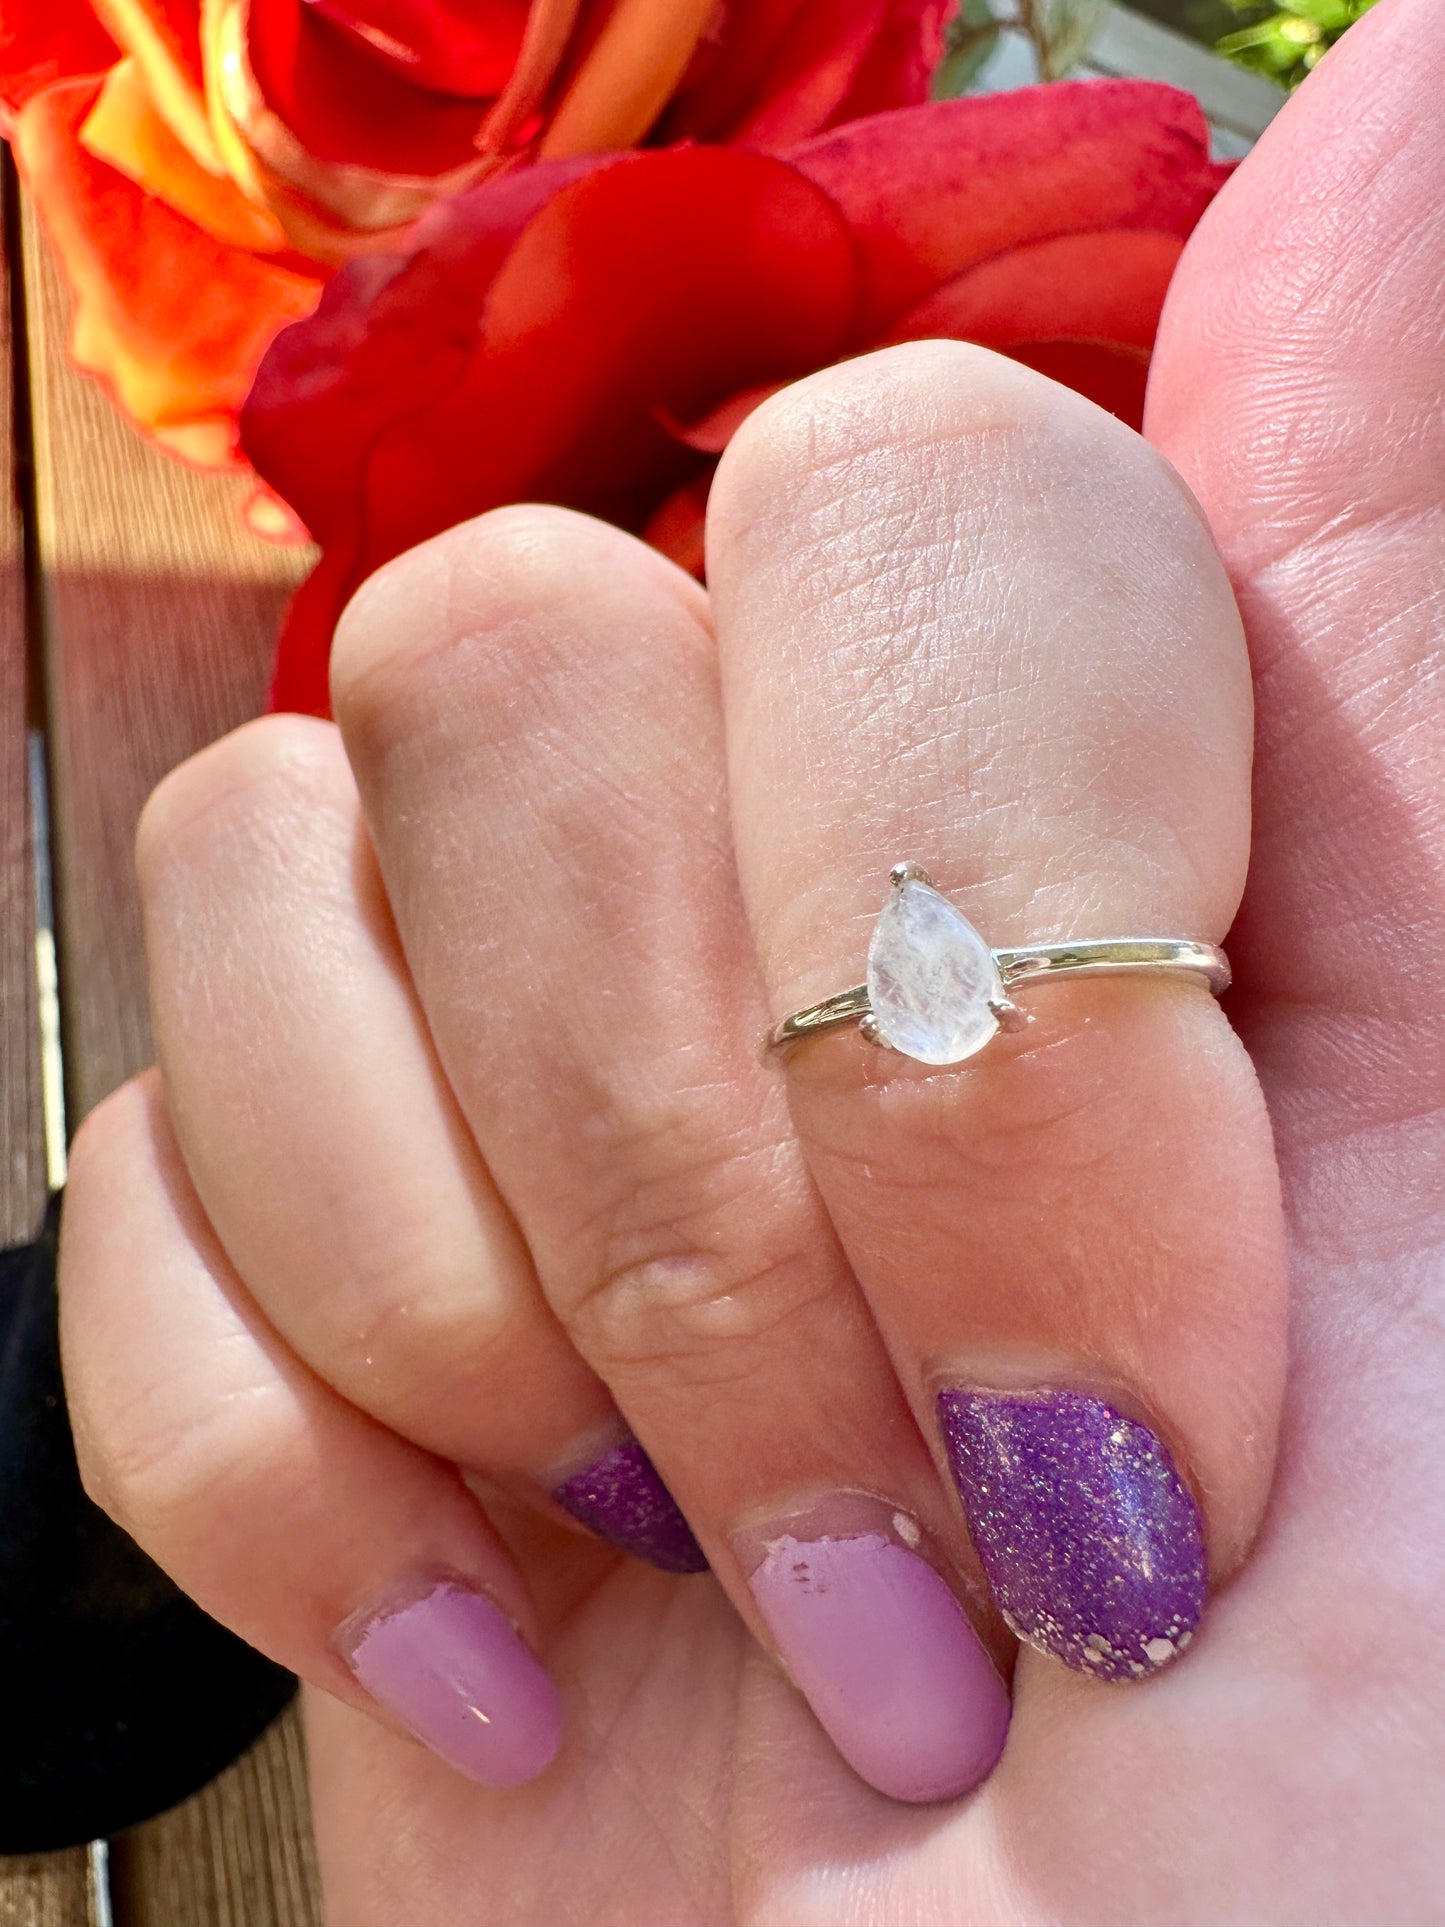 Sterling Silver Moonstone Ring Size 4.25, Captivating Handcrafted Gemstone Jewelry, Mystical Lunar Inspired Accessory, Unique Gift Idea